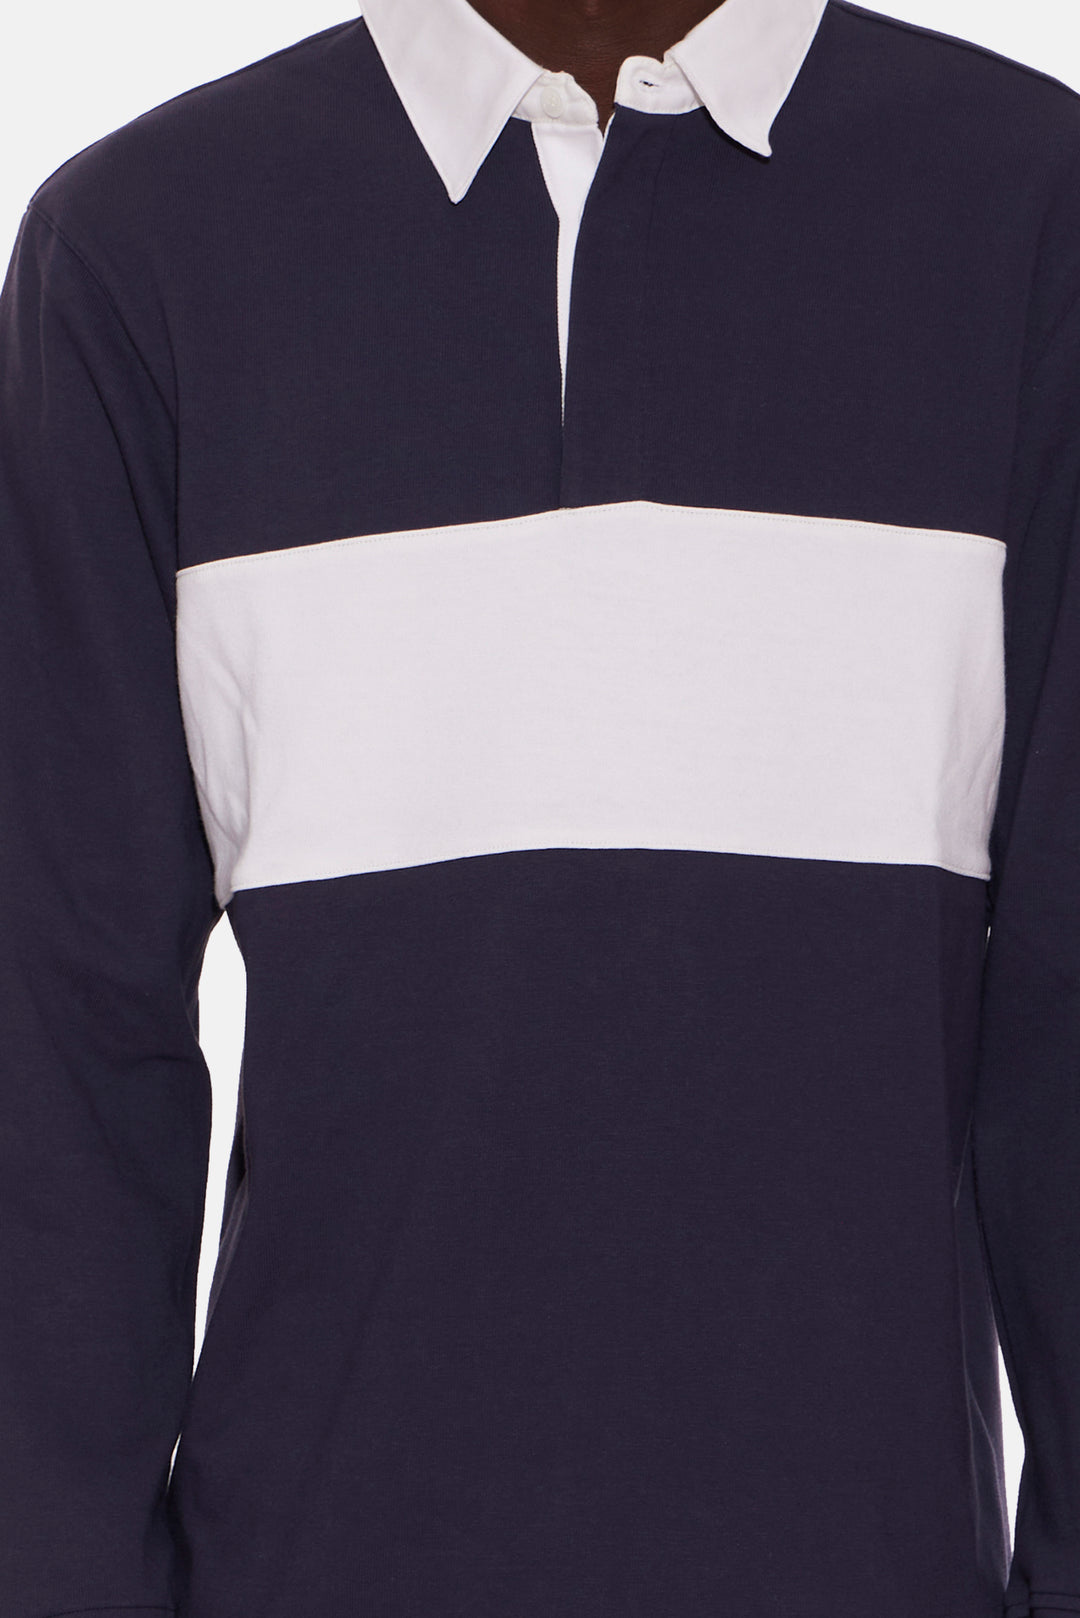 Striped Rugby Navy W/ White